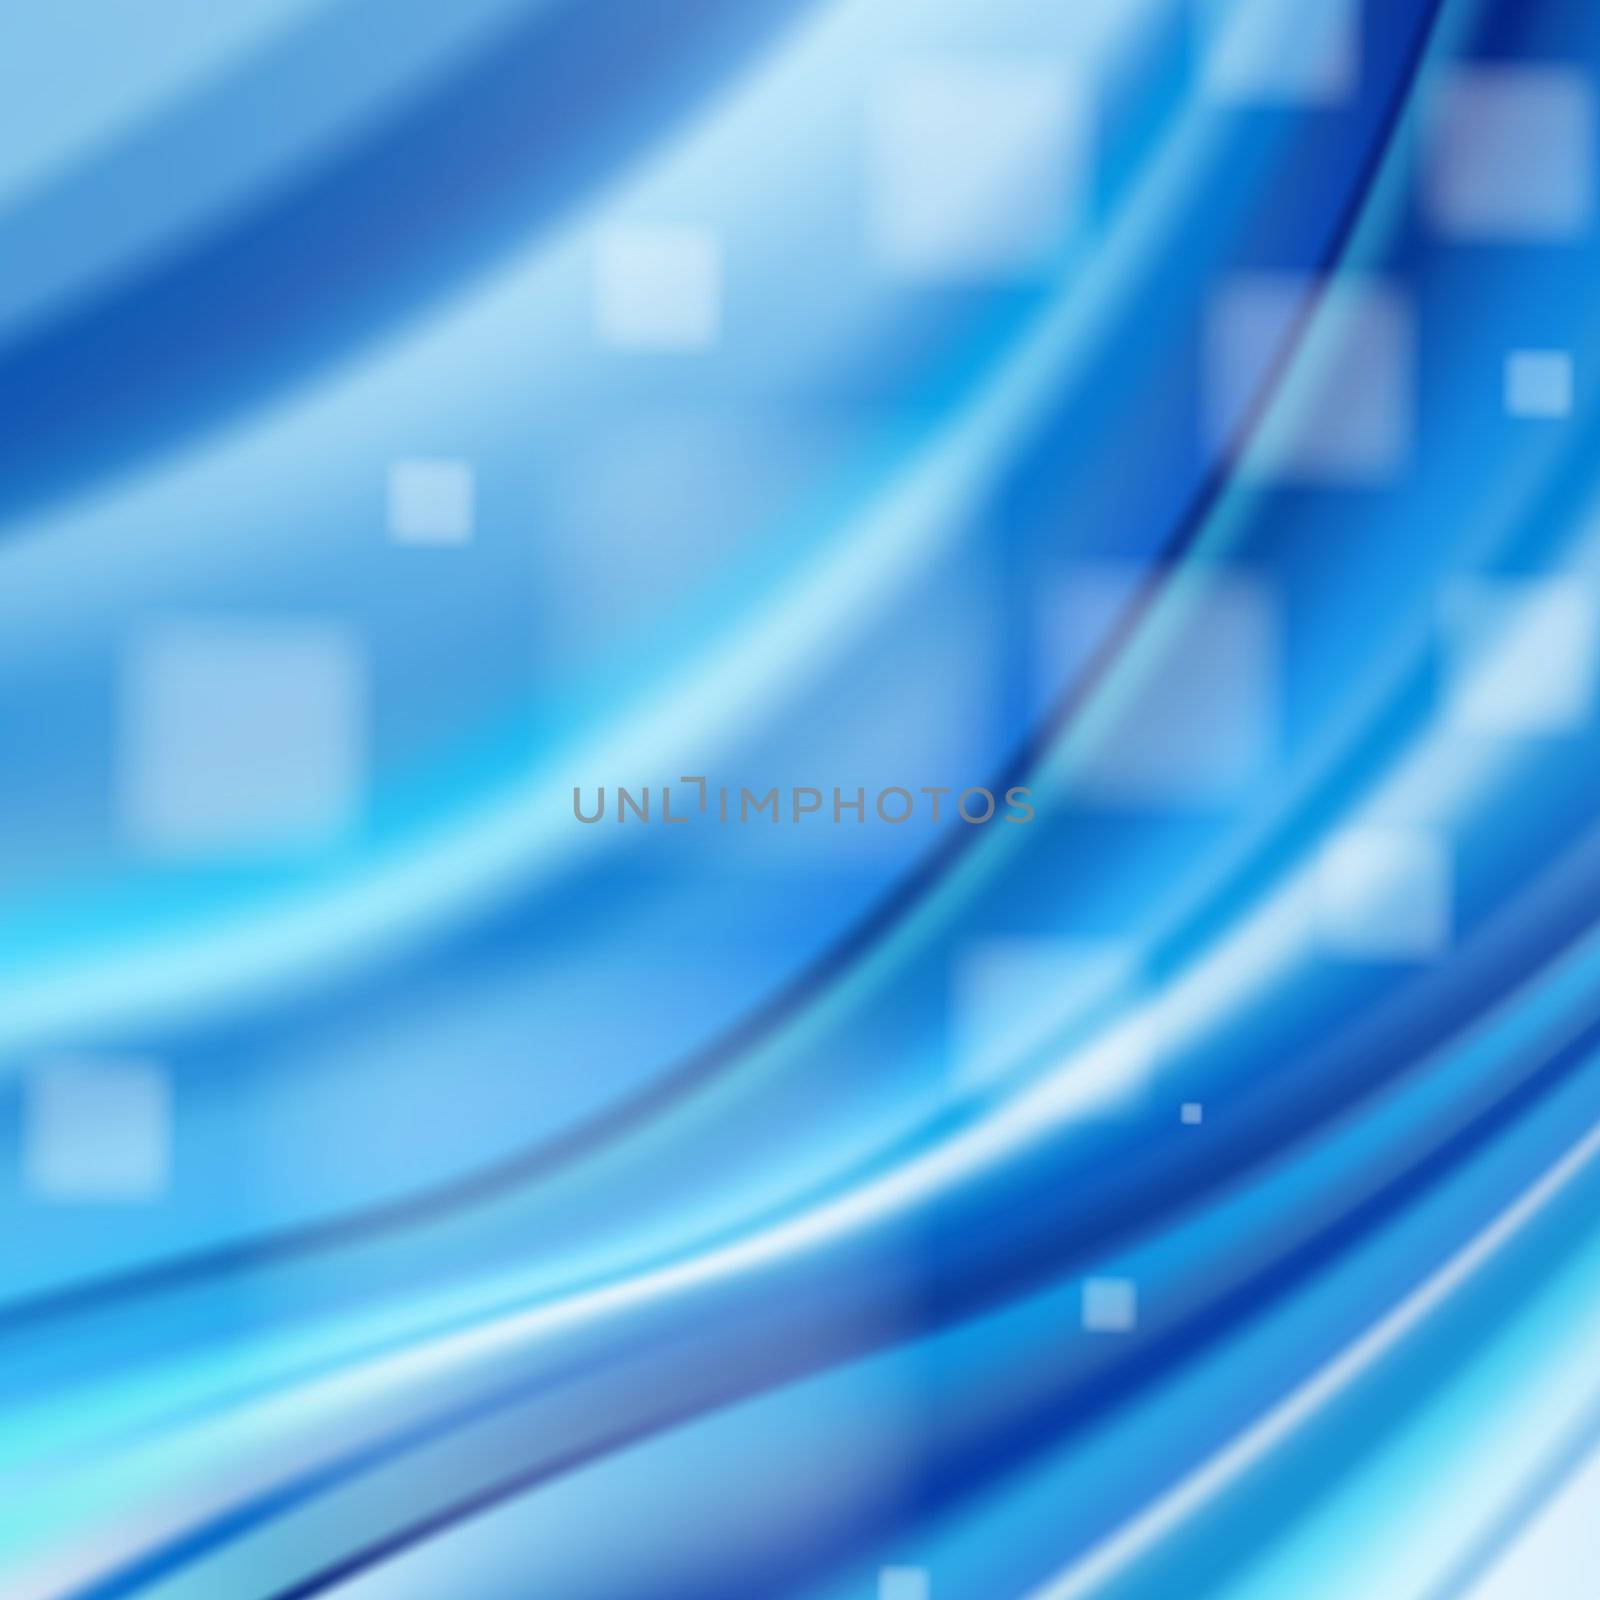 Abstract blue background by epic33